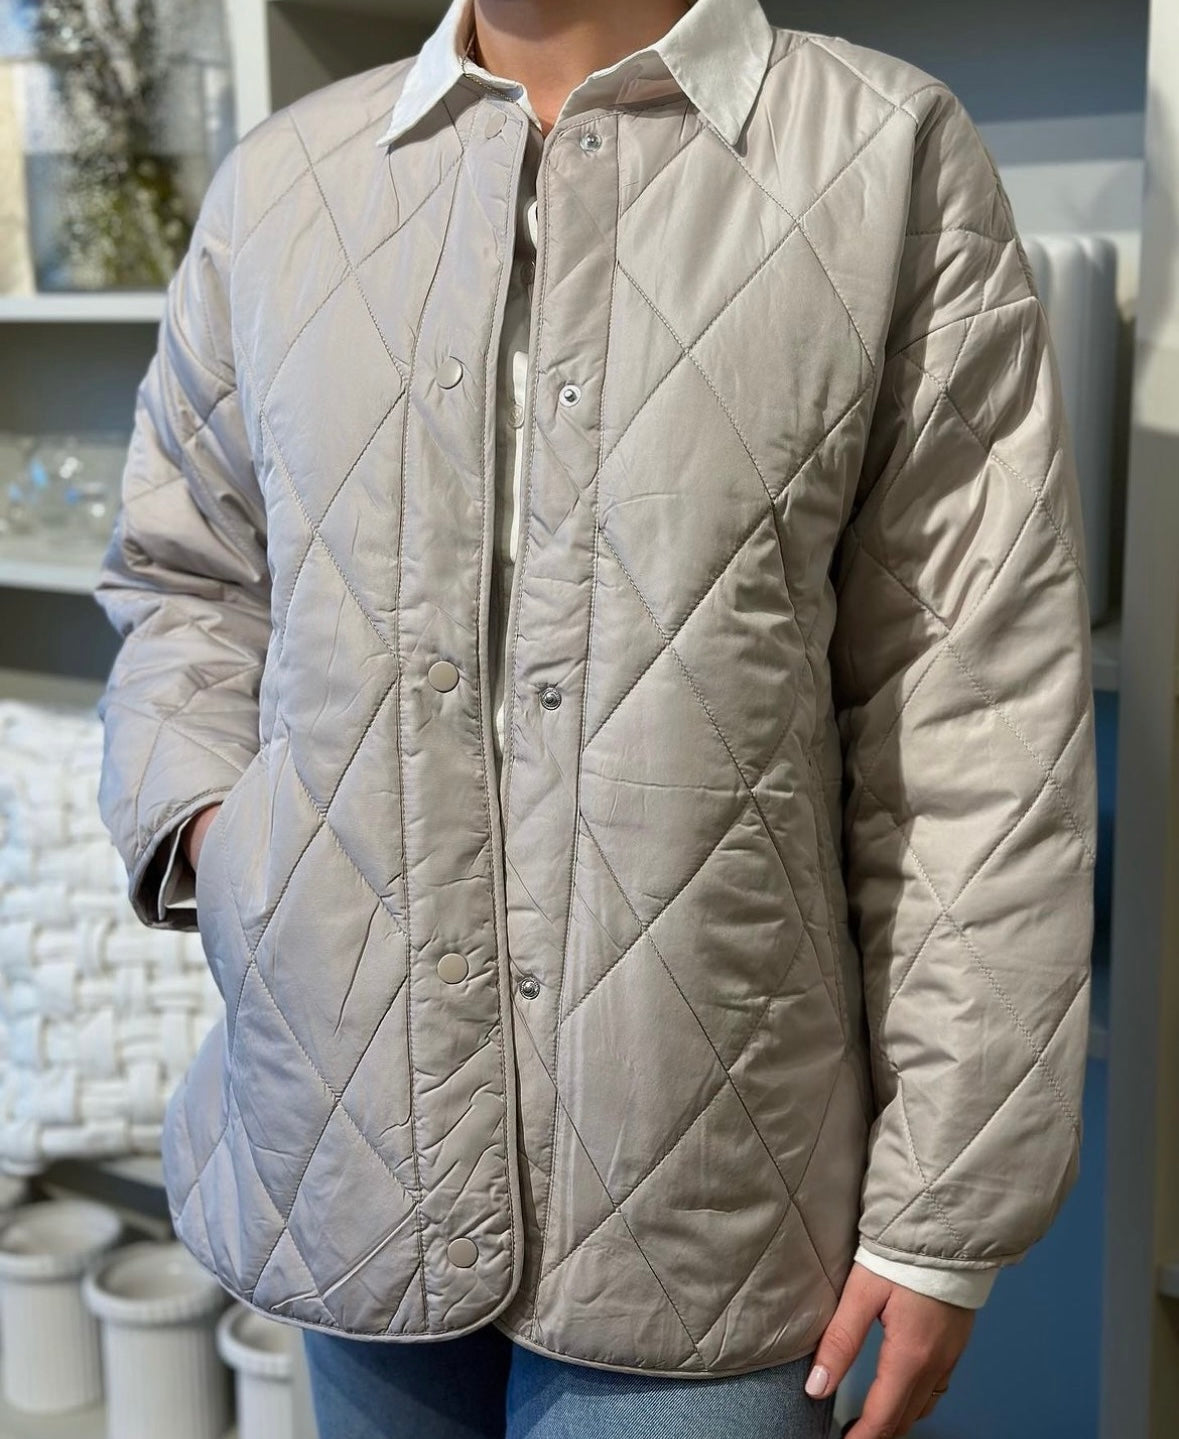 PIECES - STELLA QUILTED JACKET - SILVER GRAY